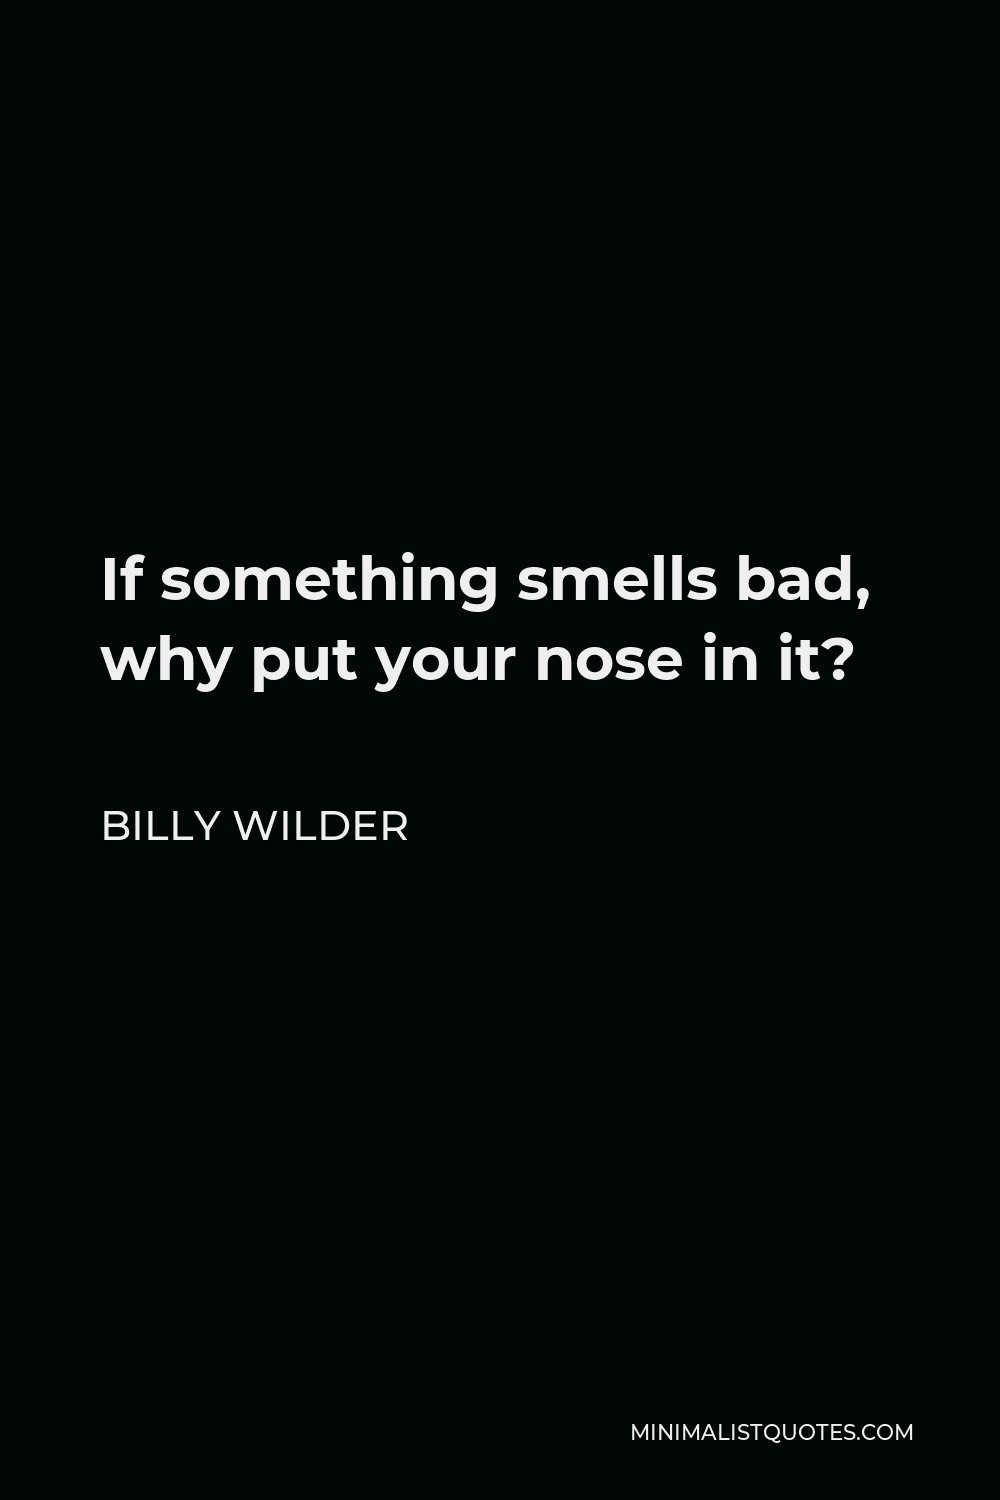 Billy Wilder Quote - If something smells bad, why put your nose in it?